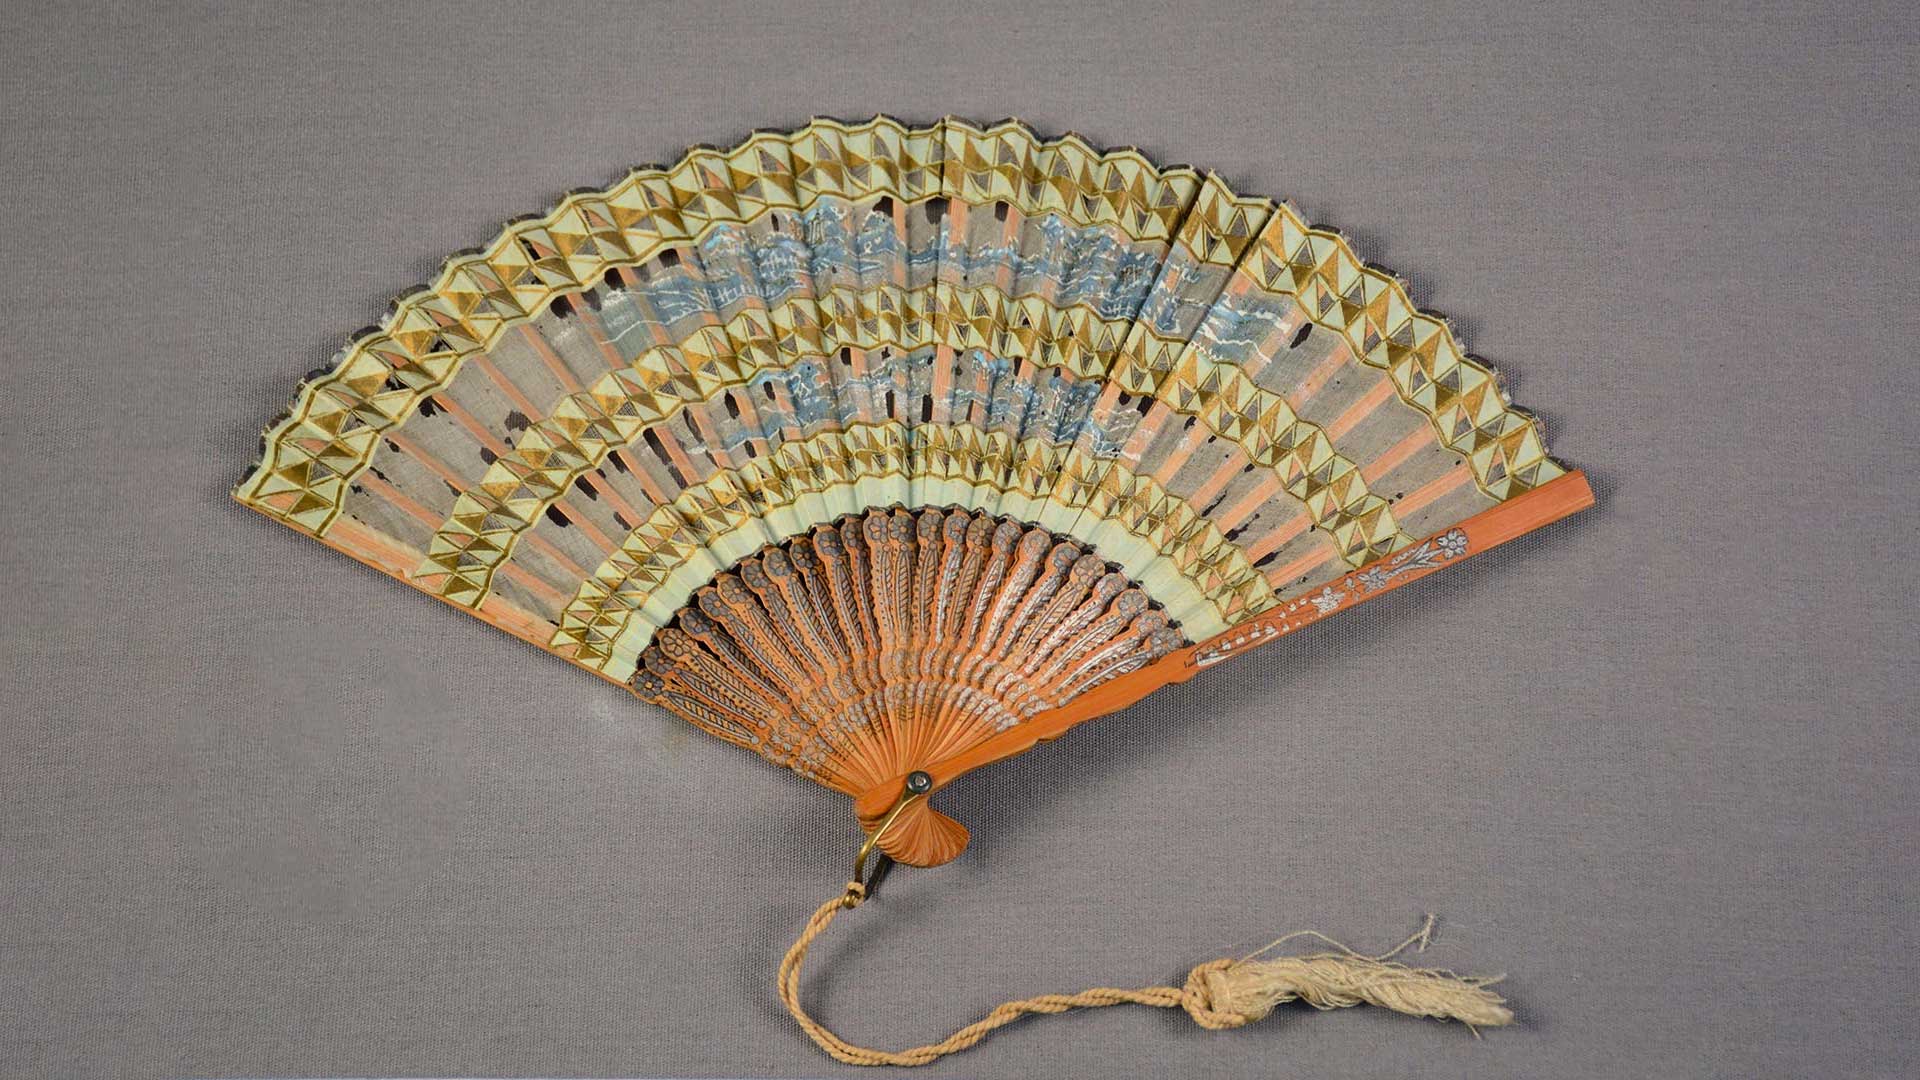 orange/yellow foldout fan with tassle and blue and brown geometric designs